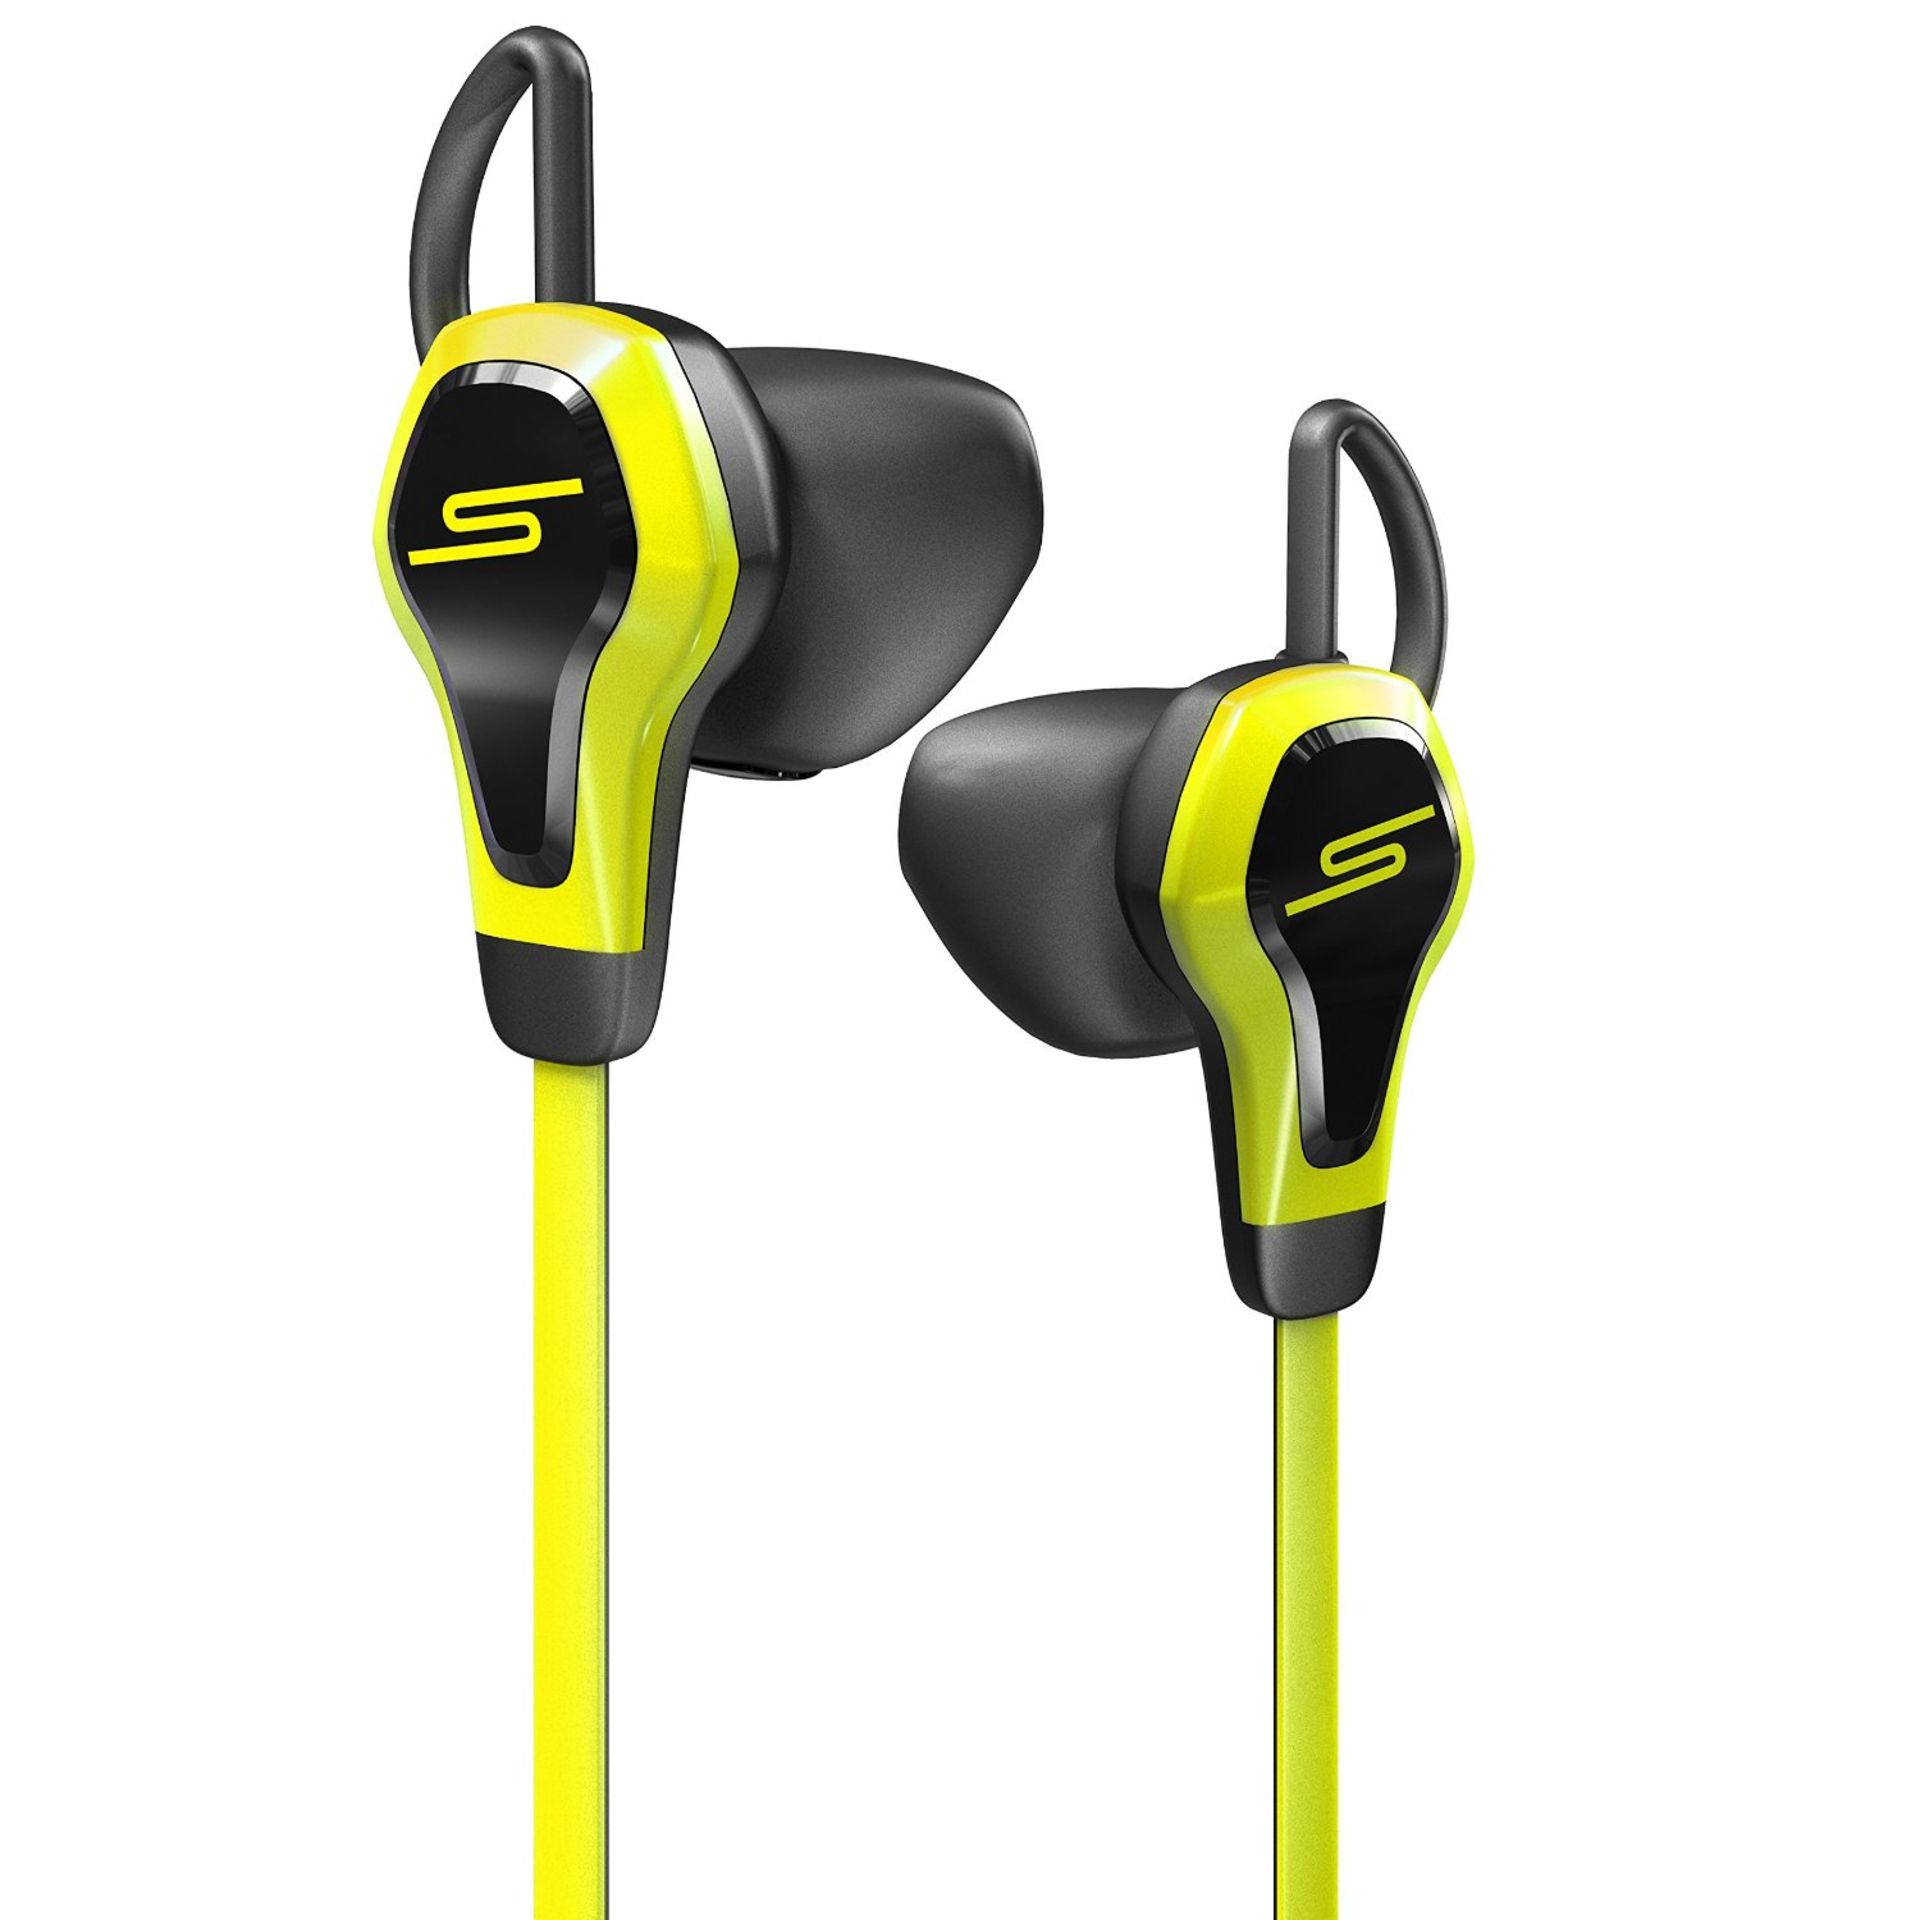 V Brand New SMS Audio BioSport Earphones - Heart Rate Monitor Measures Changes In Blood Flow - Smart